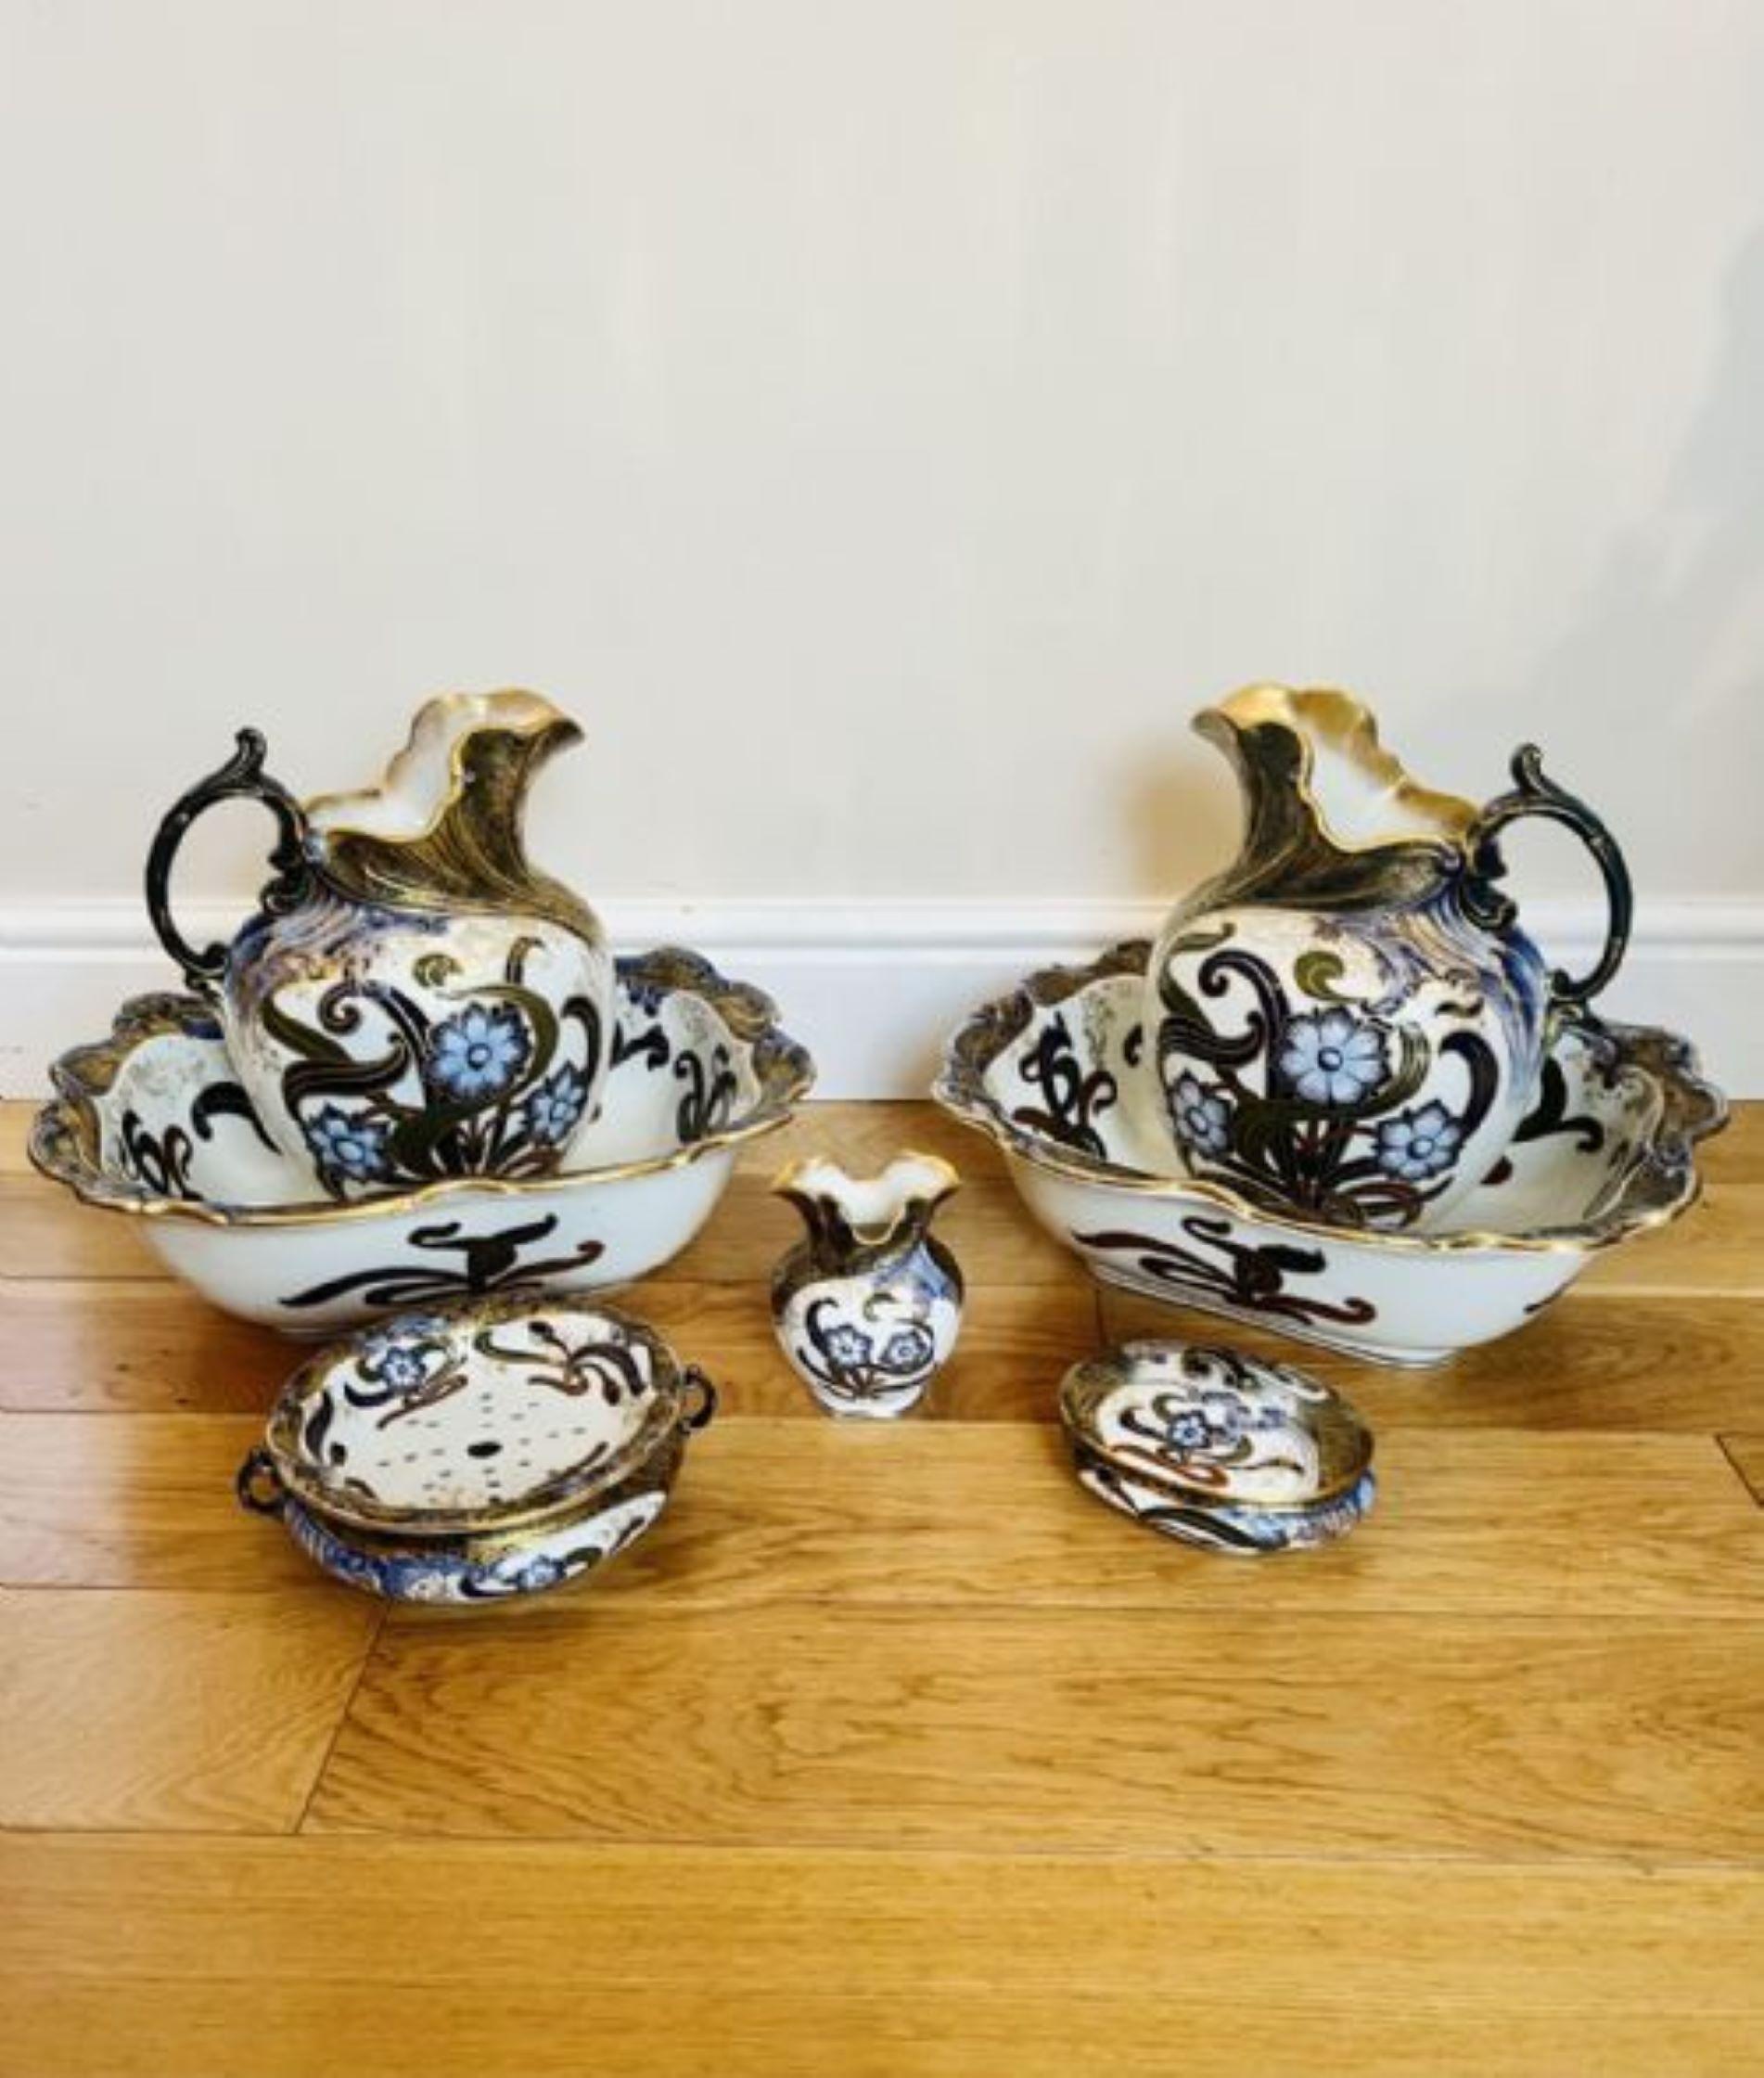 Rare pair of antique Victorian quality Doulton Burslem jug & bowl set In Good Condition For Sale In Ipswich, GB